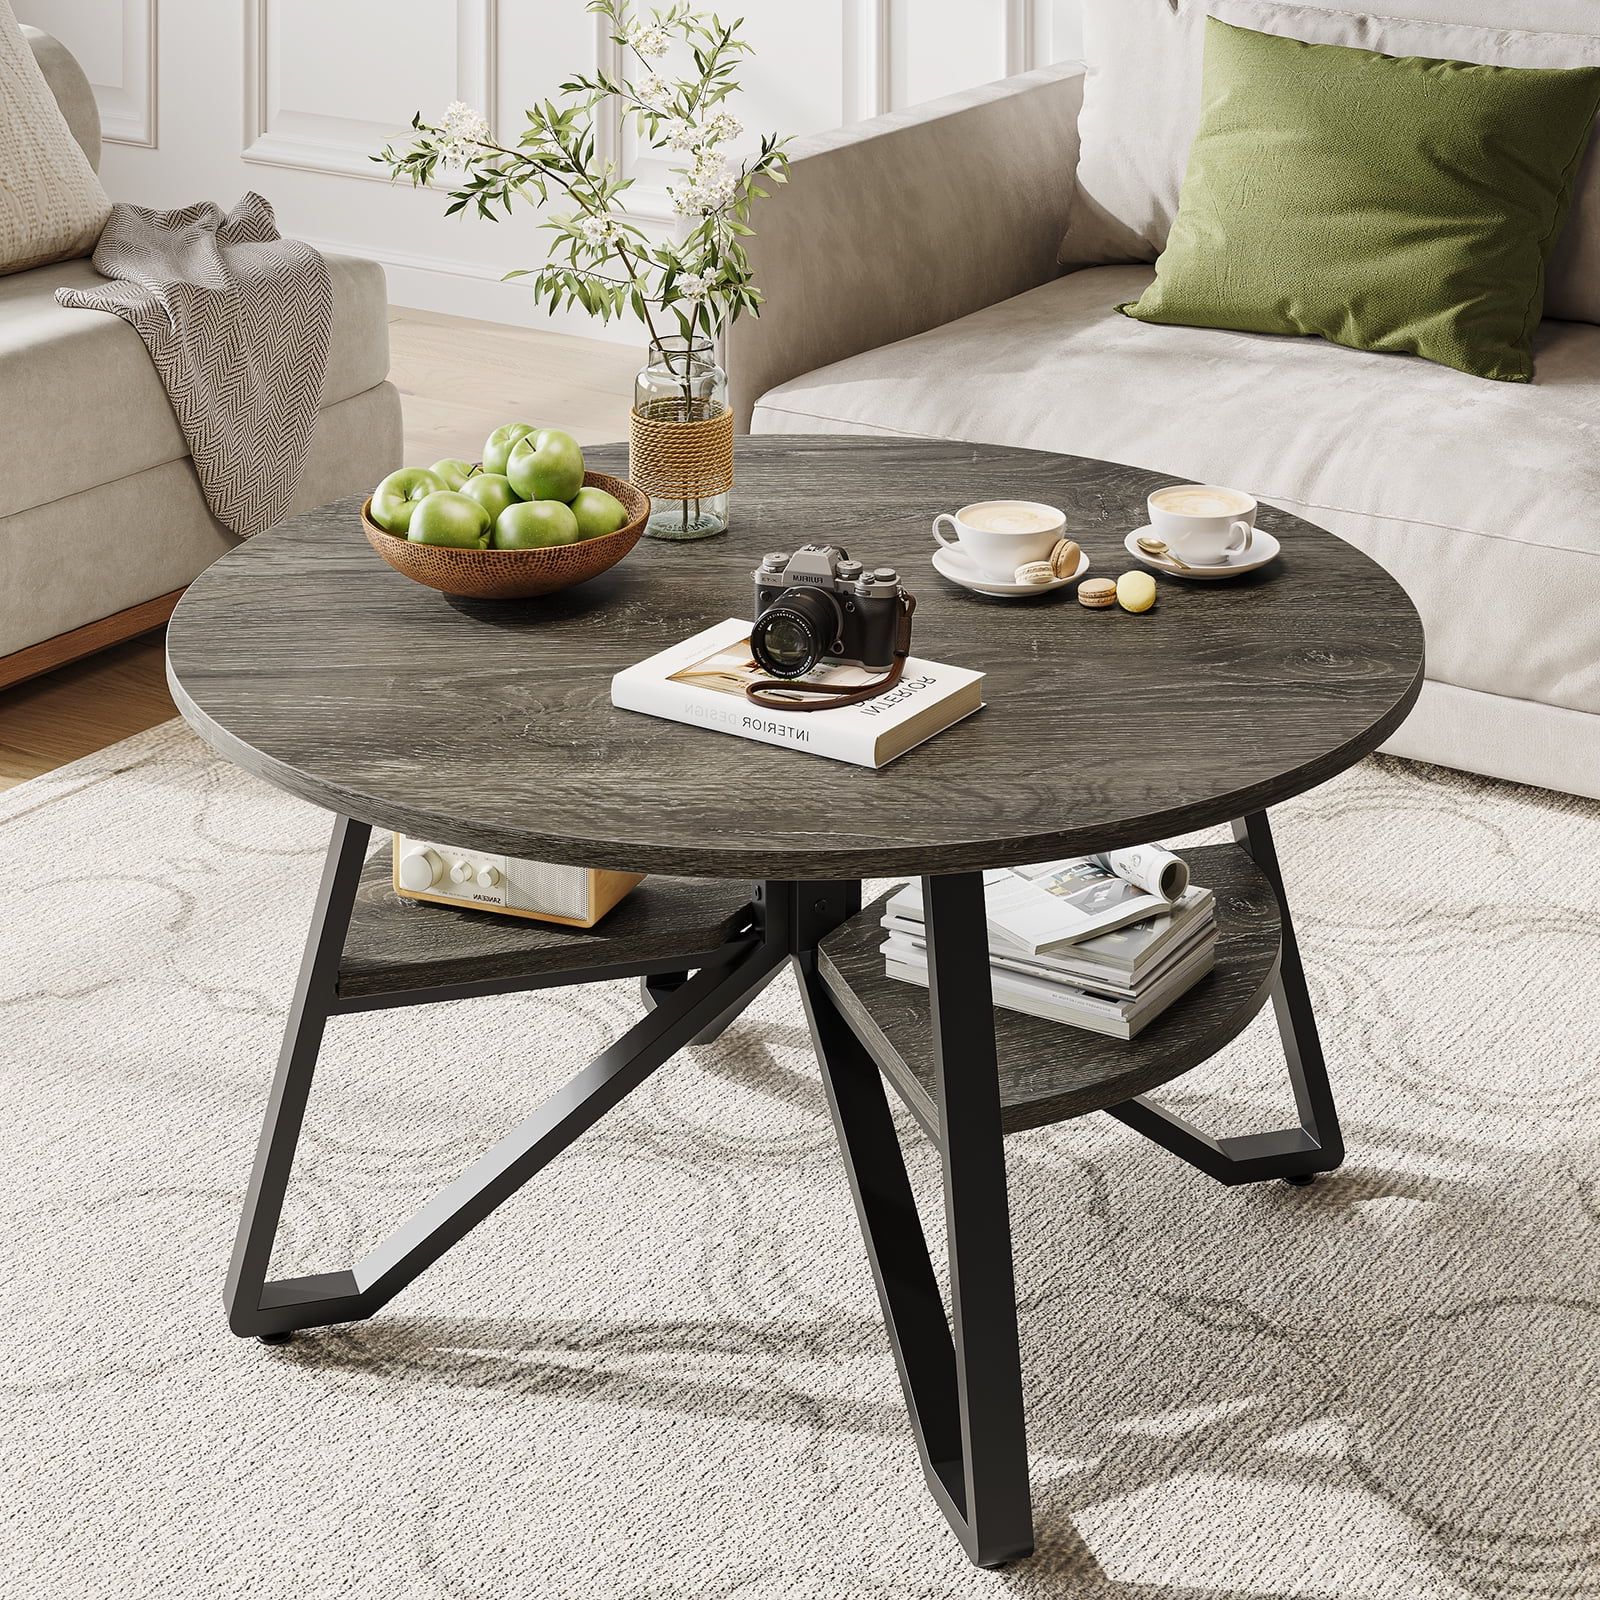 Famous Round Coffee Tables With Storage Throughout Bestier Round Coffee Table With Storage, Living Room Tables With Sturdy  Metal Legs, Black Marble – Walmart (Photo 9 of 10)